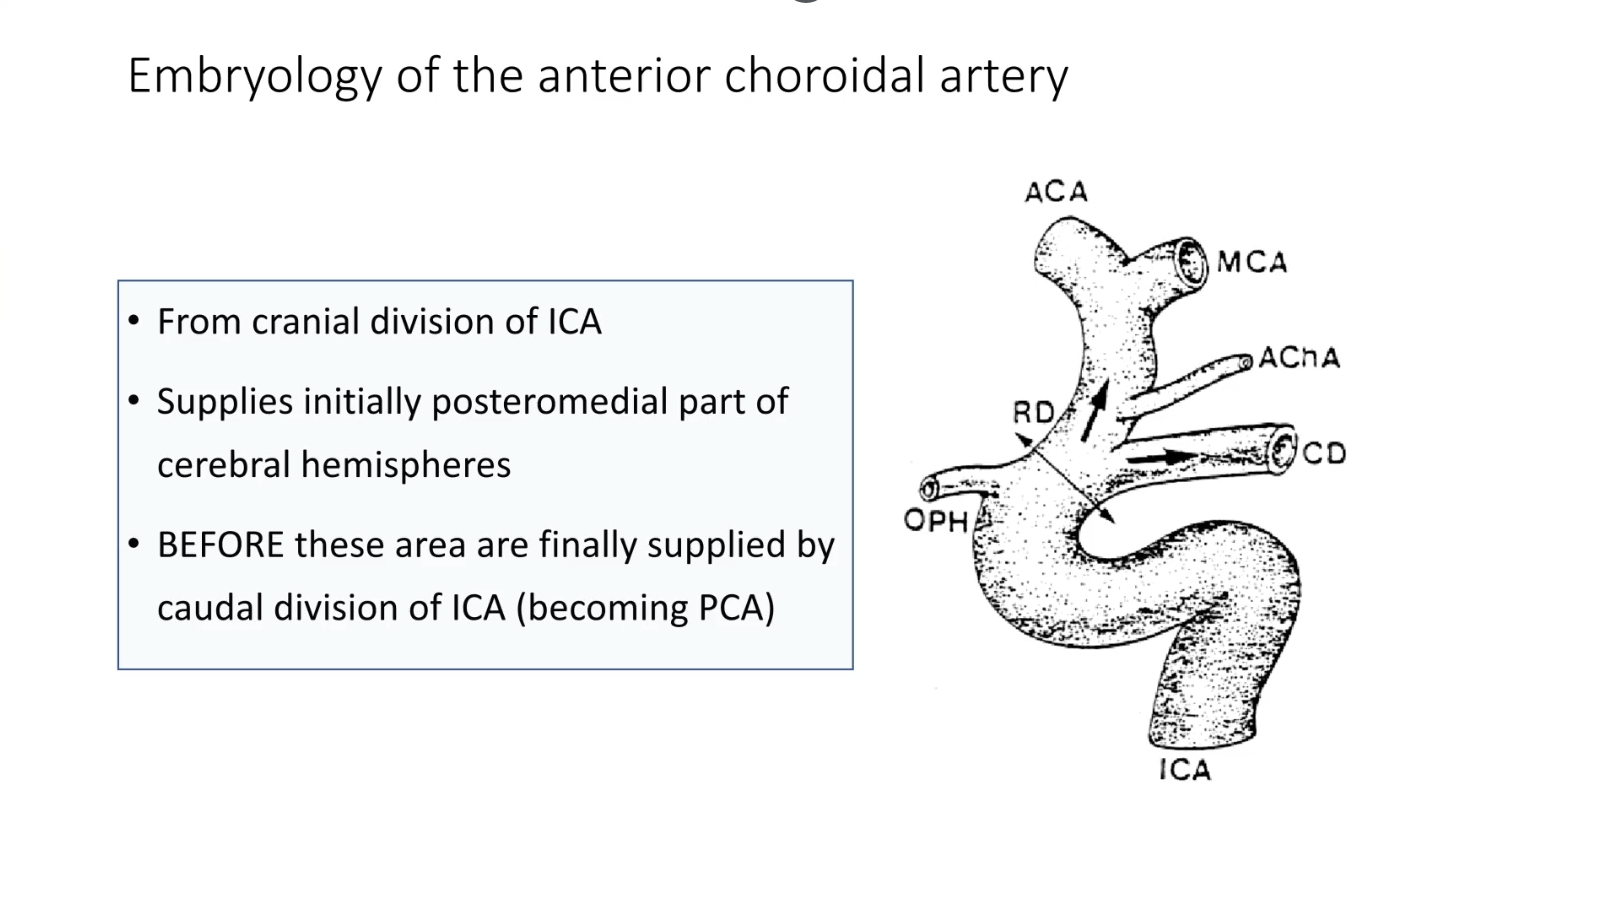 From cranial division of ICA. Supplies initially posteromedial part of cerebral hemispheres. BEFORE these area are finally supplied by caudal division of ICA (becoming PCA)